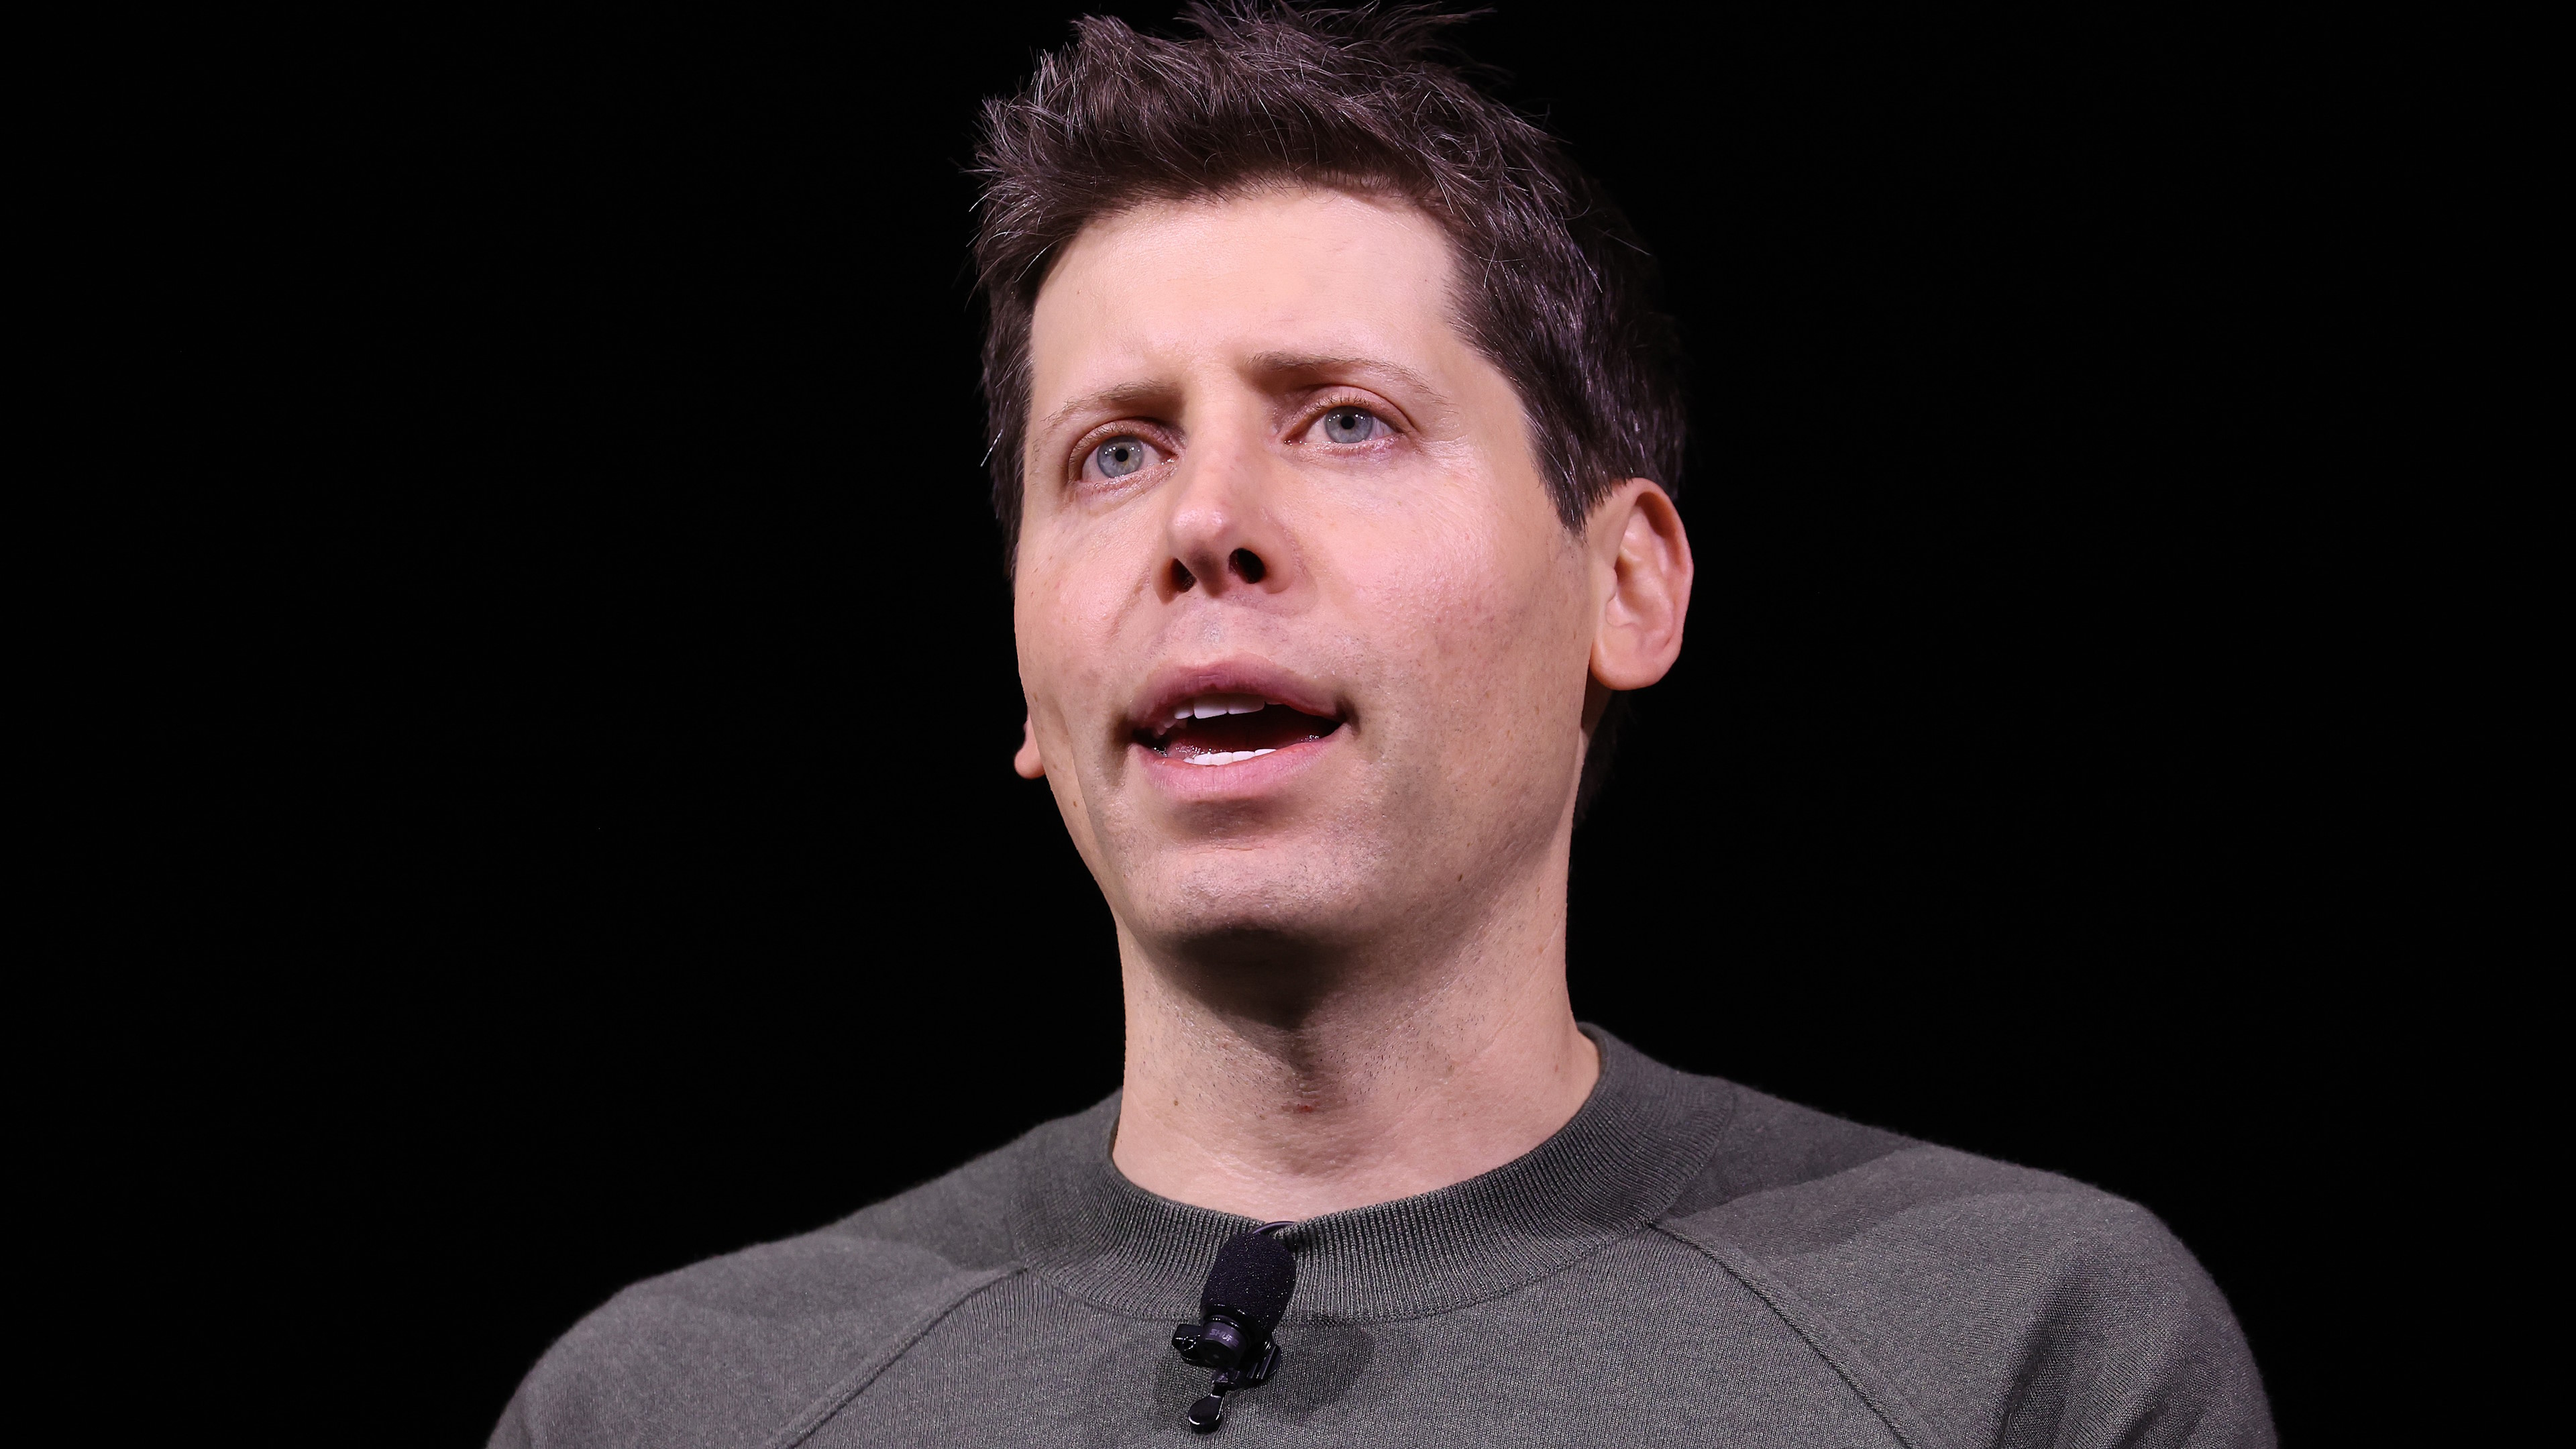 OpenAI CEO Sam Altman has been fired: Company 'no longer has confidence in his ability to continue leading'